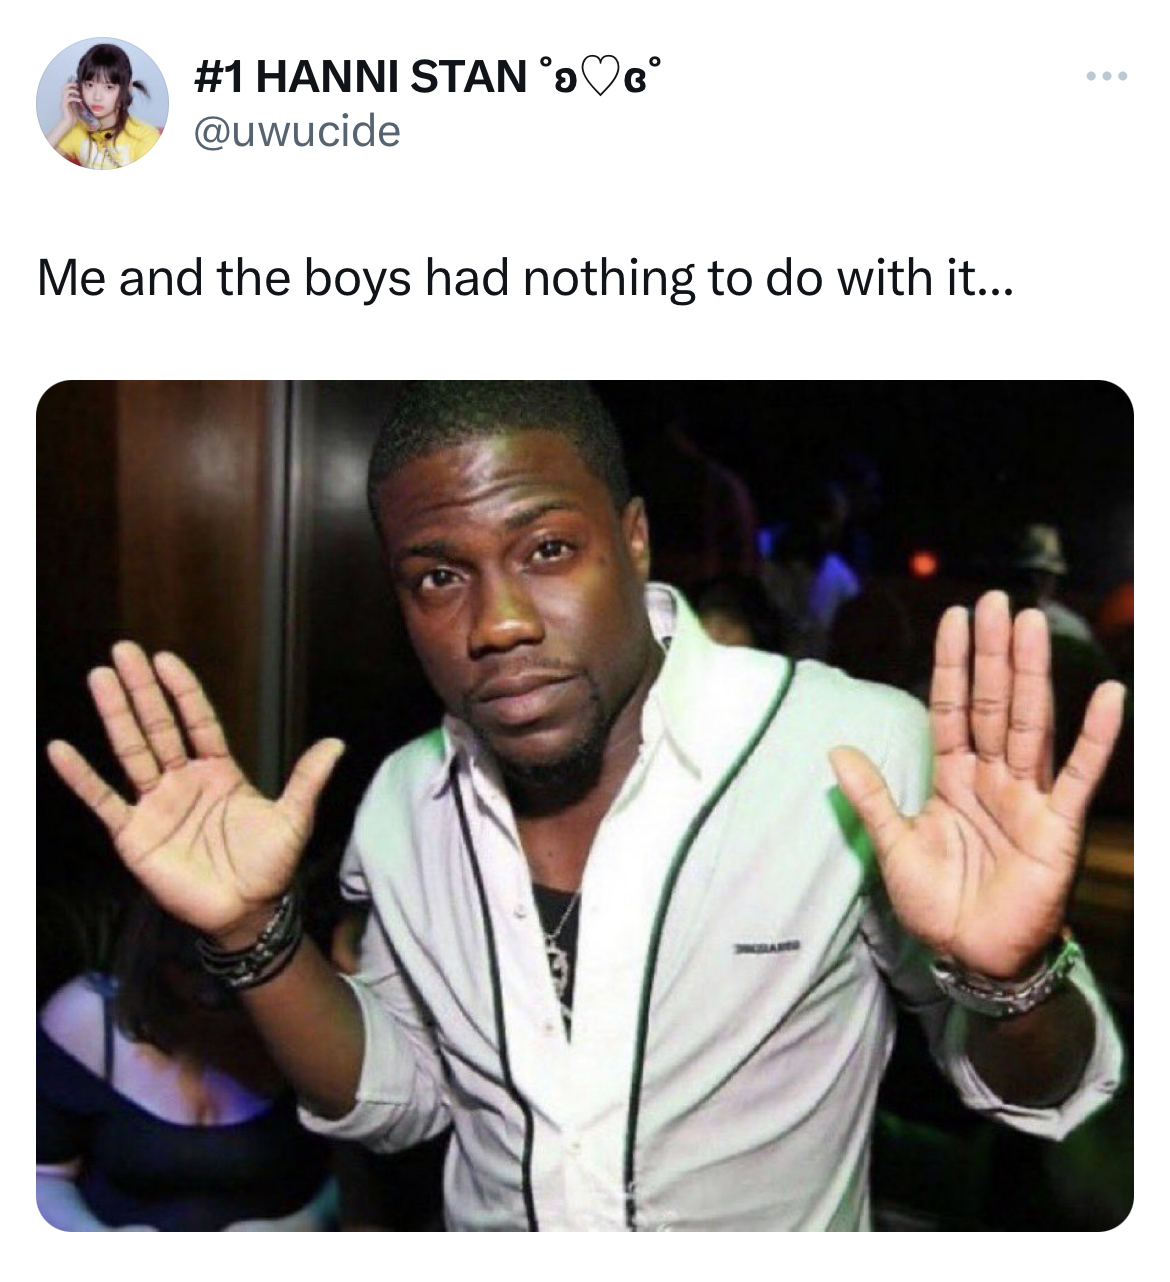 Kevin Hart trending memes - kevin hart 2011 - Hanni Stan Me and the boys had nothing to do with it...